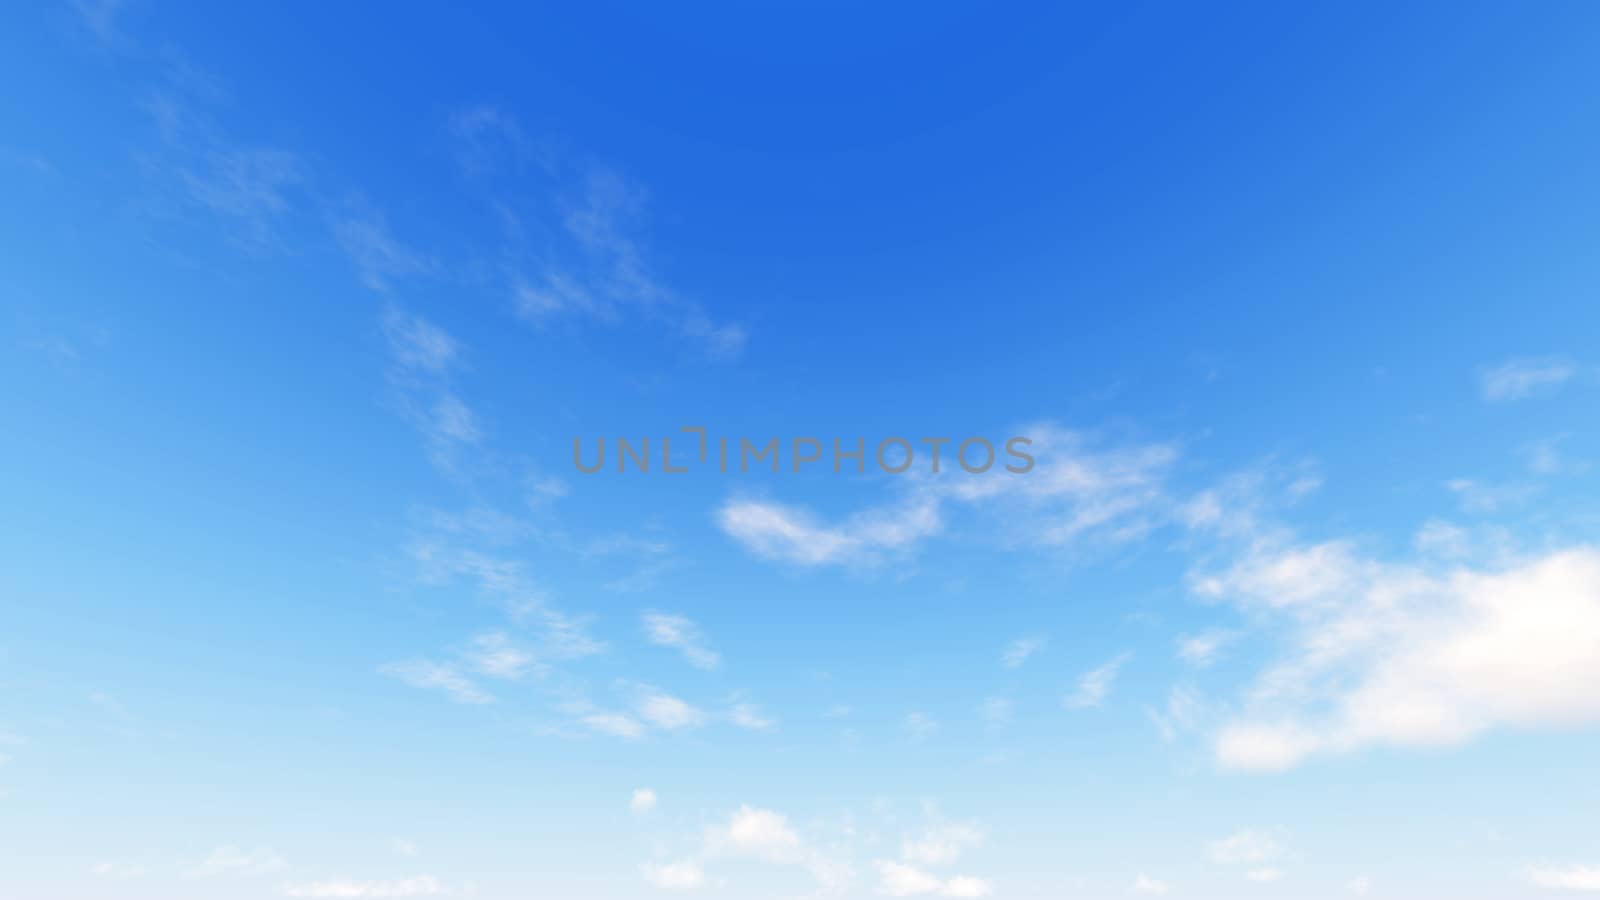 Cloudy blue sky abstract background, 3d illustration by teerawit